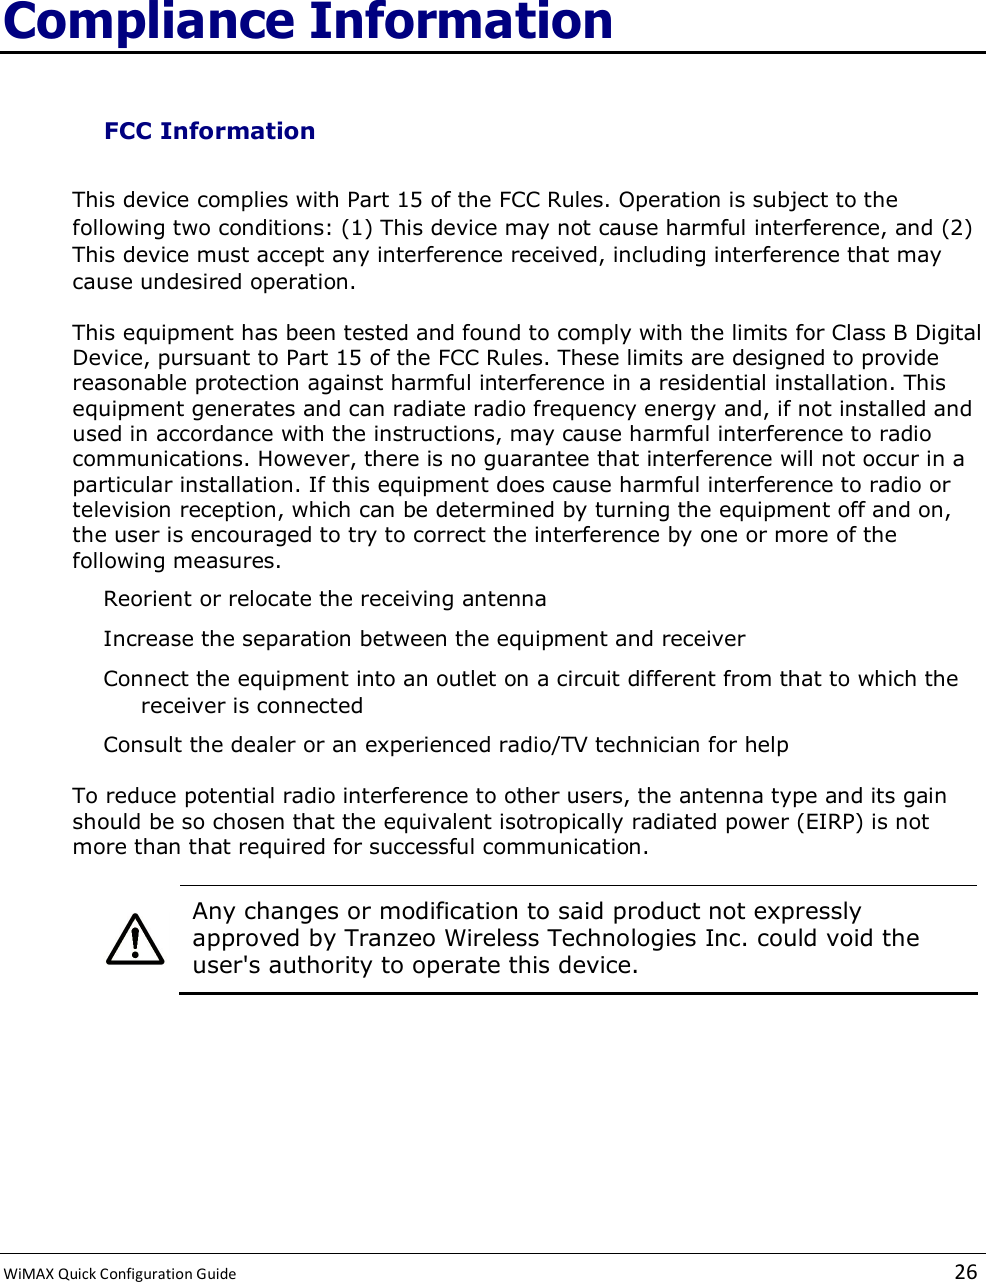  WiMAX Quick Configuration Guide   26    Compliance Information FCC Information This device complies with Part 15 of the FCC Rules. Operation is subject to the following two conditions: (1) This device may not cause harmful interference, and (2) This device must accept any interference received, including interference that may cause undesired operation. This equipment has been tested and found to comply with the limits for Class B Digital Device, pursuant to Part 15 of the FCC Rules. These limits are designed to provide reasonable protection against harmful interference in a residential installation. This equipment generates and can radiate radio frequency energy and, if not installed and used in accordance with the instructions, may cause harmful interference to radio communications. However, there is no guarantee that interference will not occur in a particular installation. If this equipment does cause harmful interference to radio or television reception, which can be determined by turning the equipment off and on, the user is encouraged to try to correct the interference by one or more of the following measures. Reorient or relocate the receiving antenna Increase the separation between the equipment and receiver Connect the equipment into an outlet on a circuit different from that to which the receiver is connected Consult the dealer or an experienced radio/TV technician for help To reduce potential radio interference to other users, the antenna type and its gain should be so chosen that the equivalent isotropically radiated power (EIRP) is not more than that required for successful communication.   Any changes or modification to said product not expressly approved by Tranzeo Wireless Technologies Inc. could void the user&apos;s authority to operate this device.    